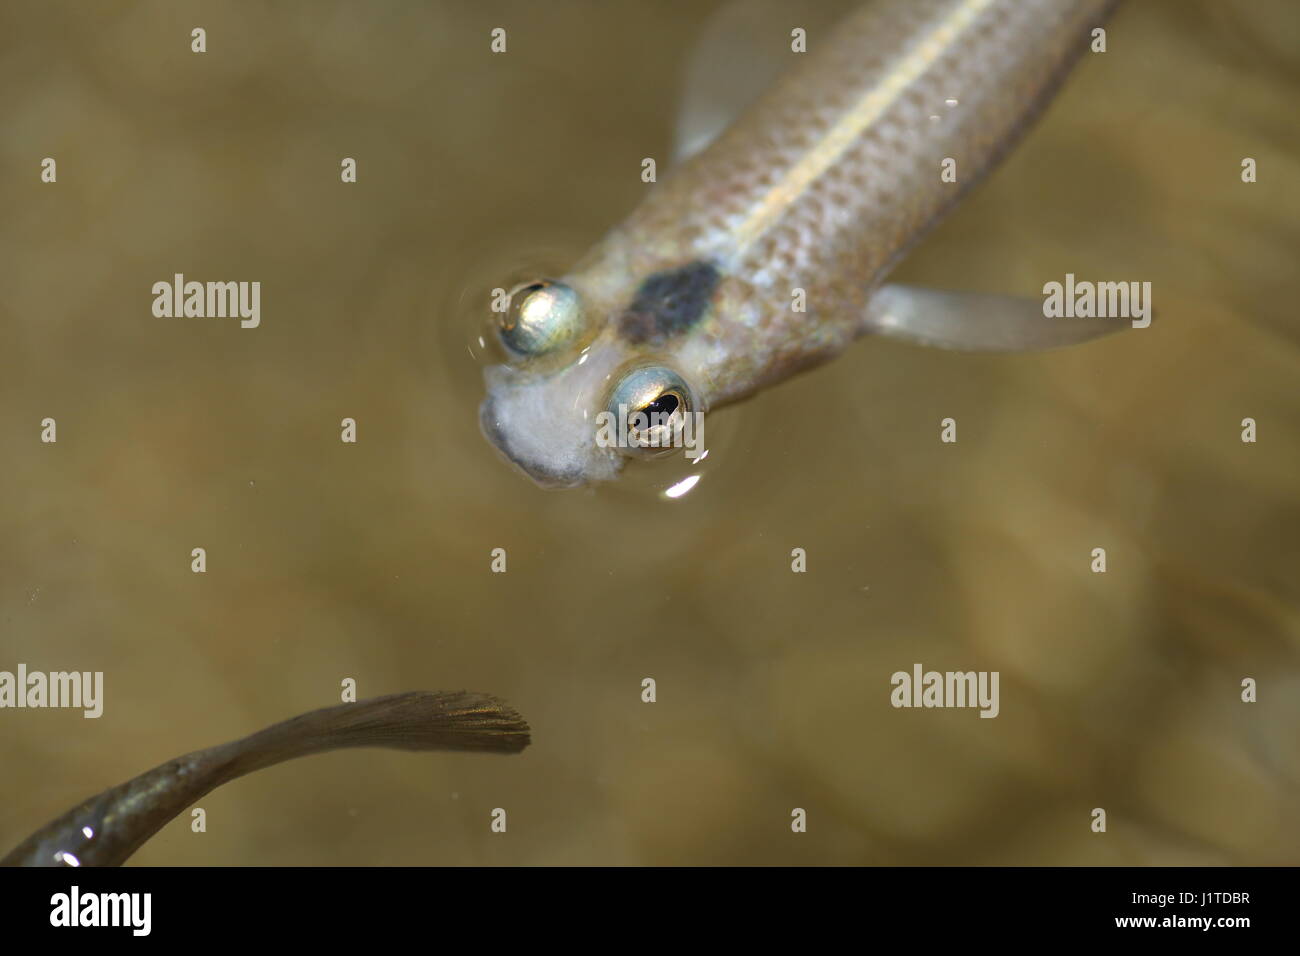 Four-eyed fish (Anableps anableps) in Amazon, South America Stock Photo